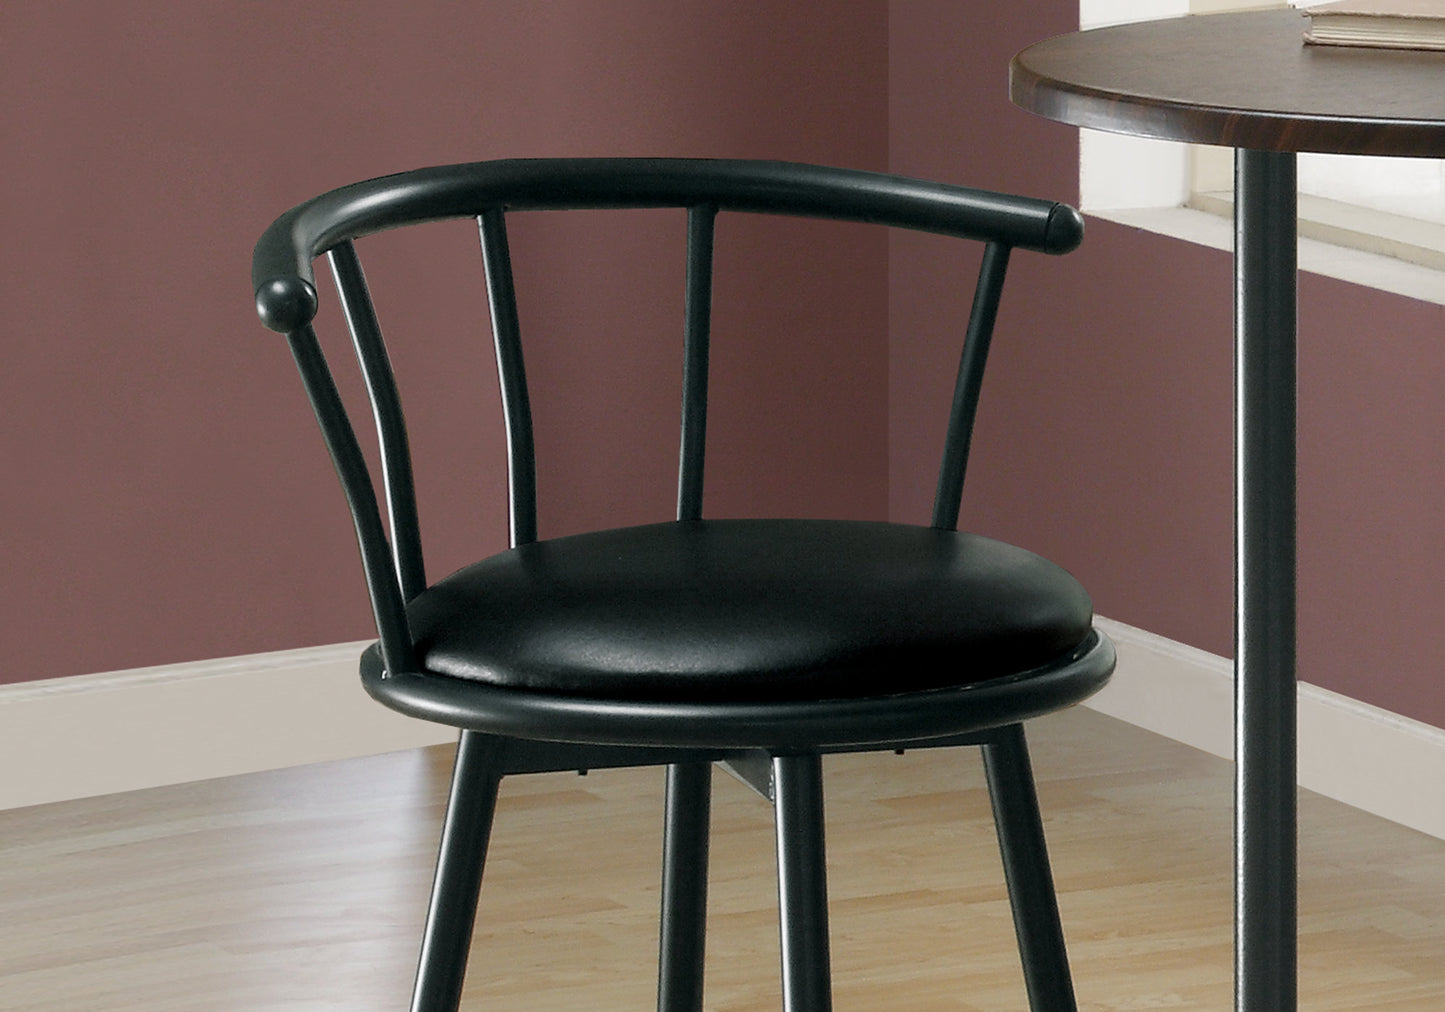 74" Black Metal Low Back Bar Chair With Footrest